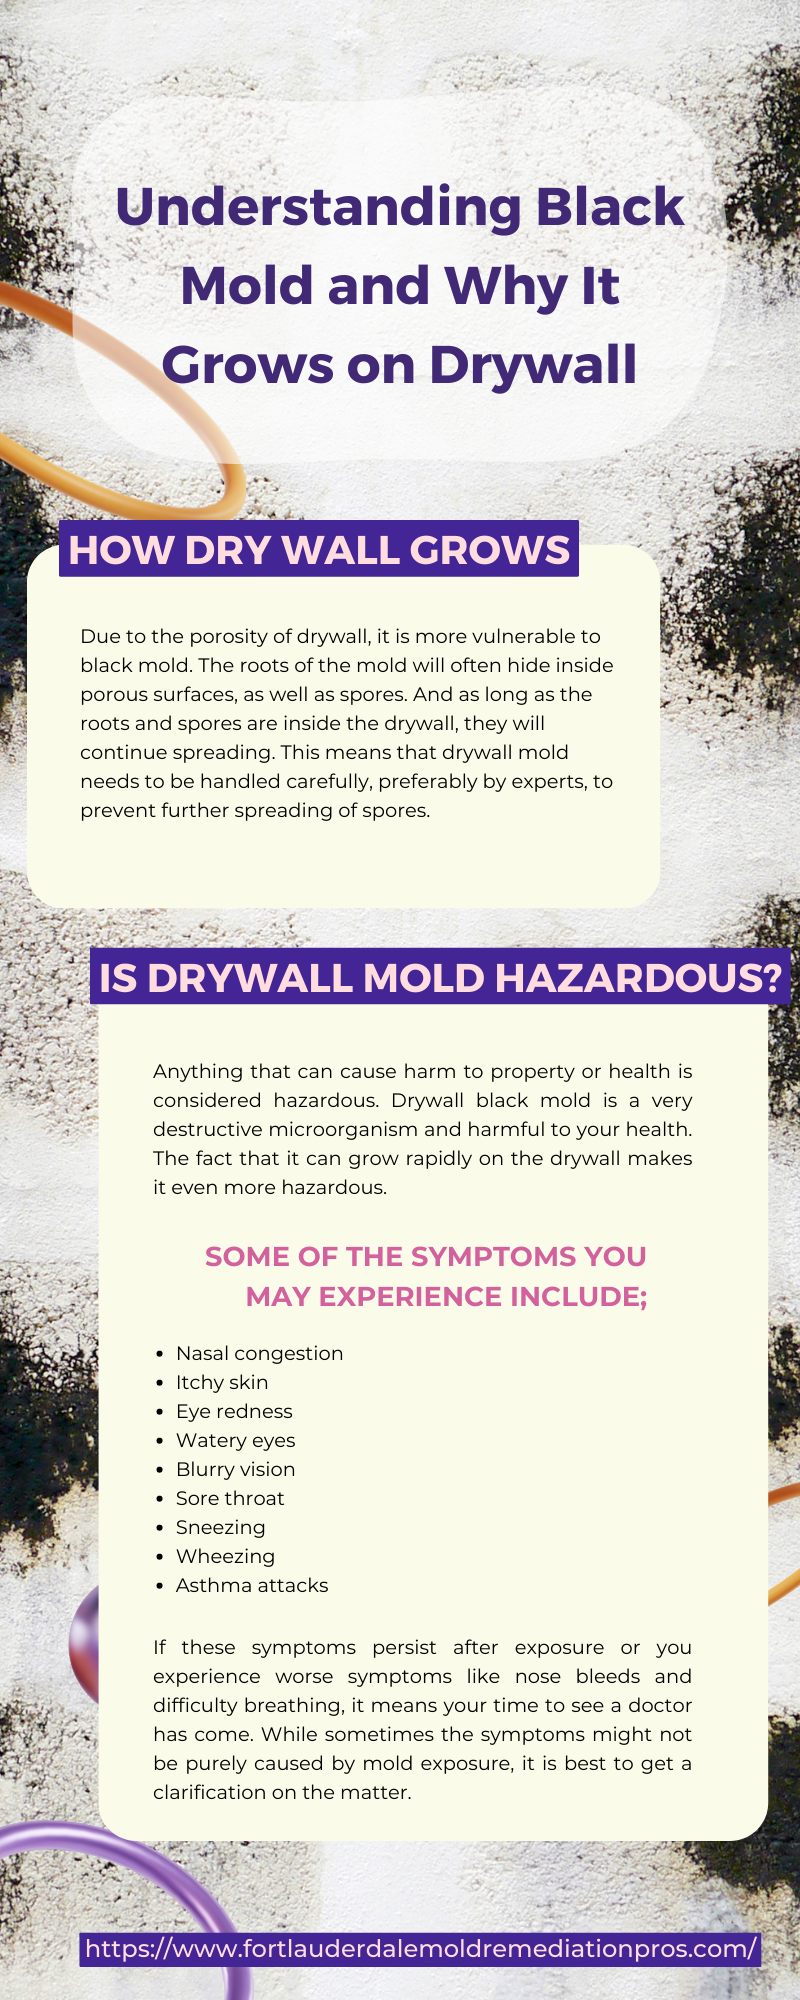 Understanding Black Mold and Why It Grows on Drywall